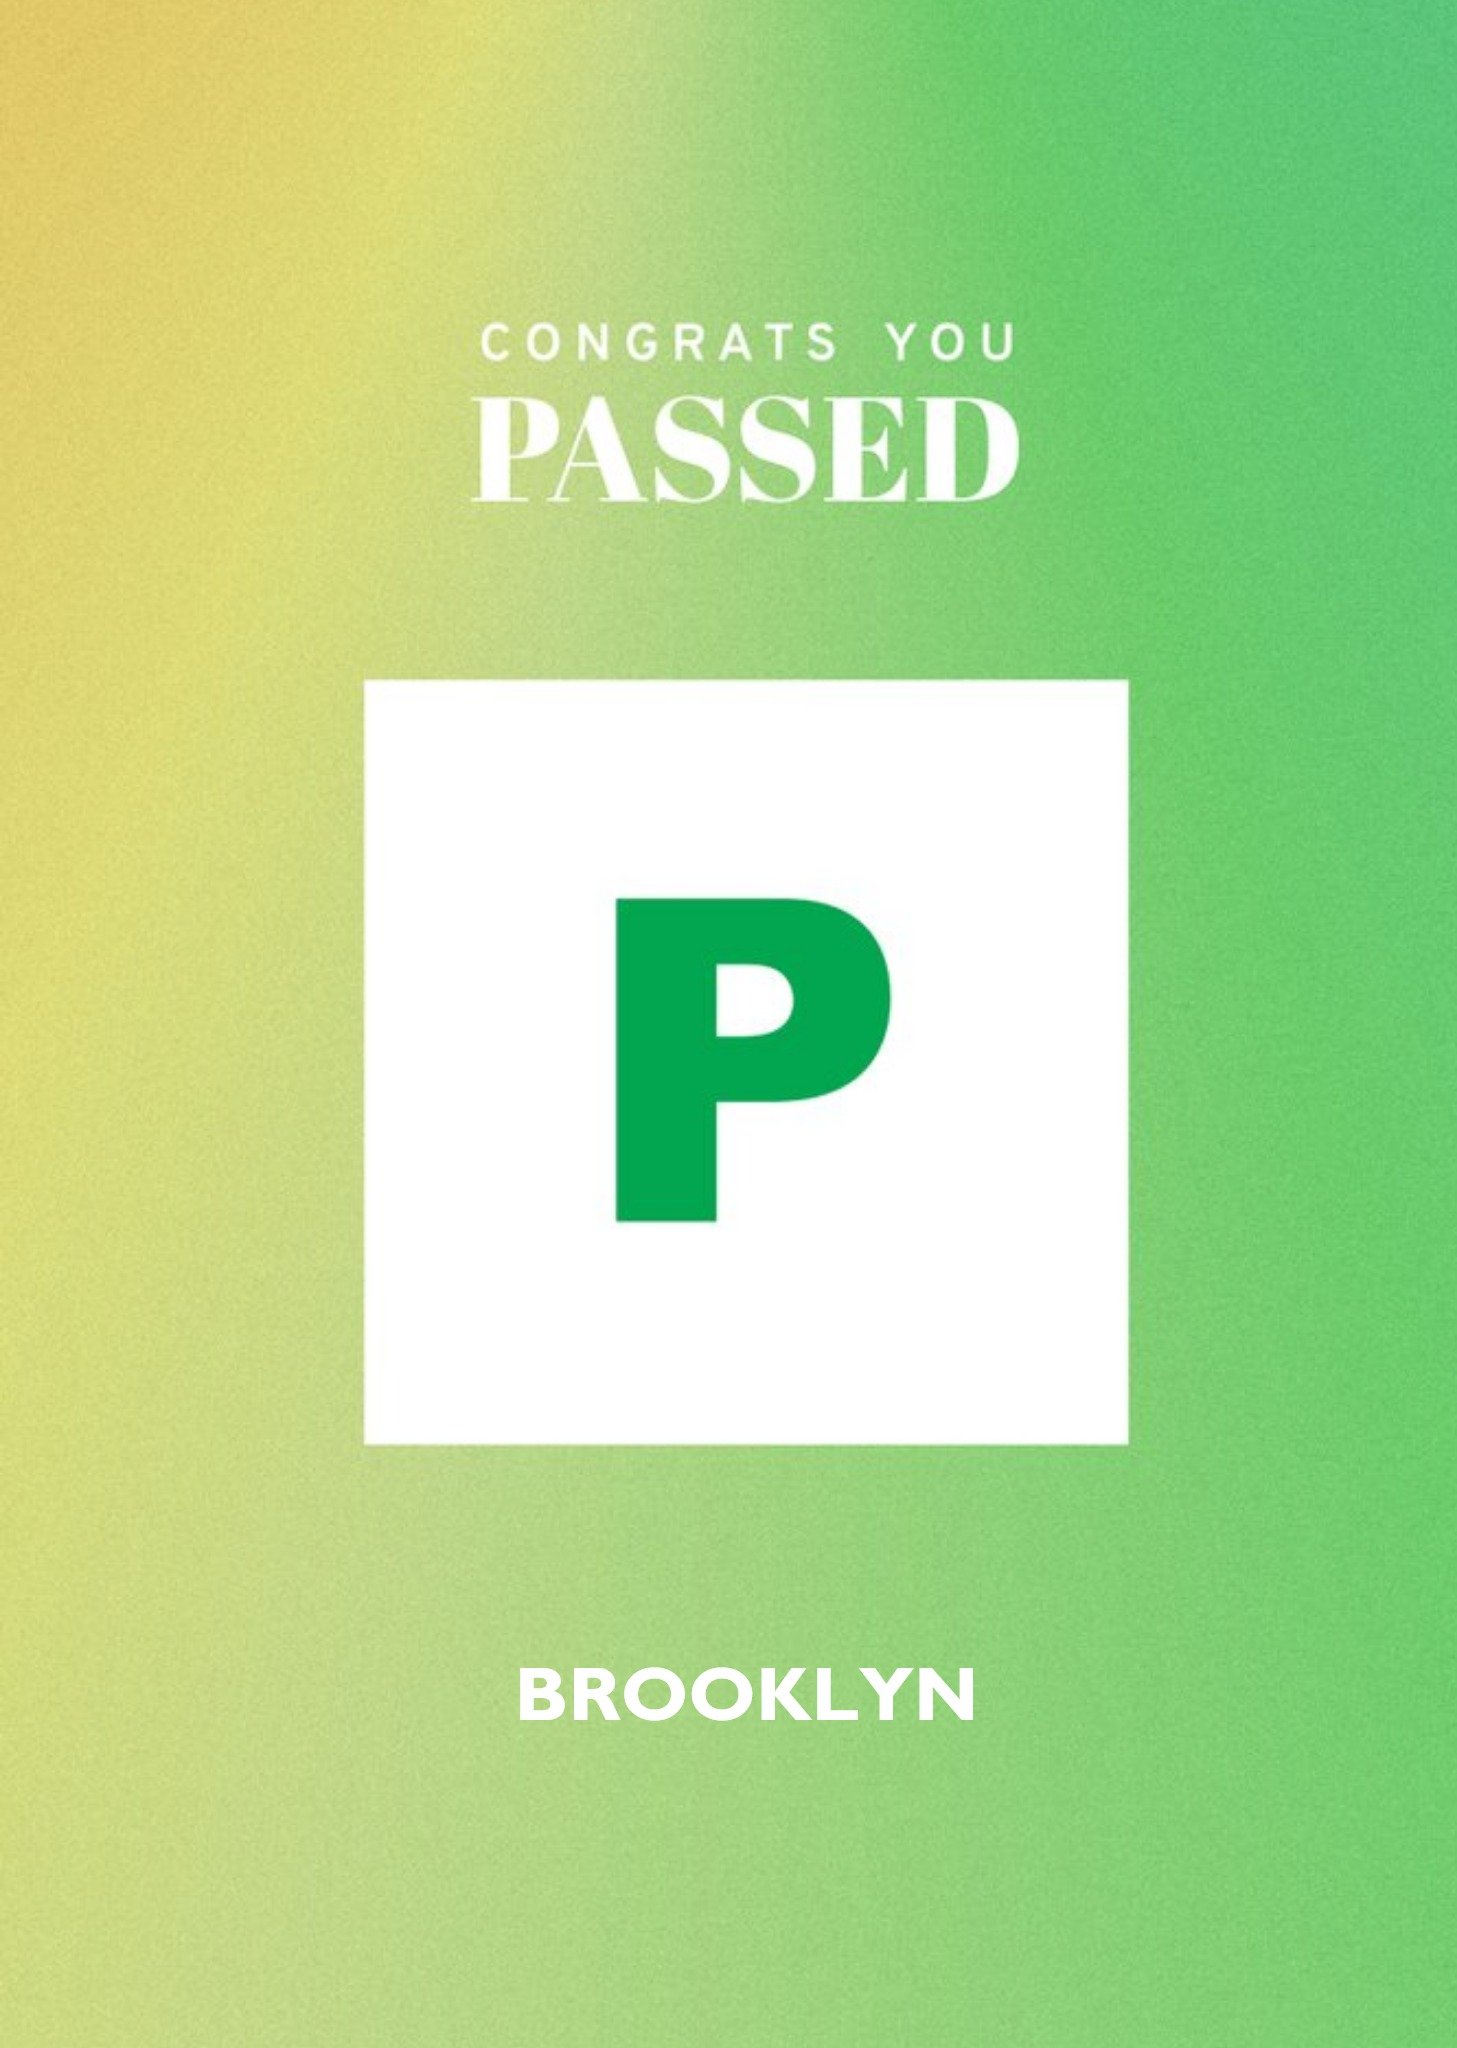 Moonpig Illustration Of A P Plate On A Green Gradient Background Driving Test Congratulations Card, 